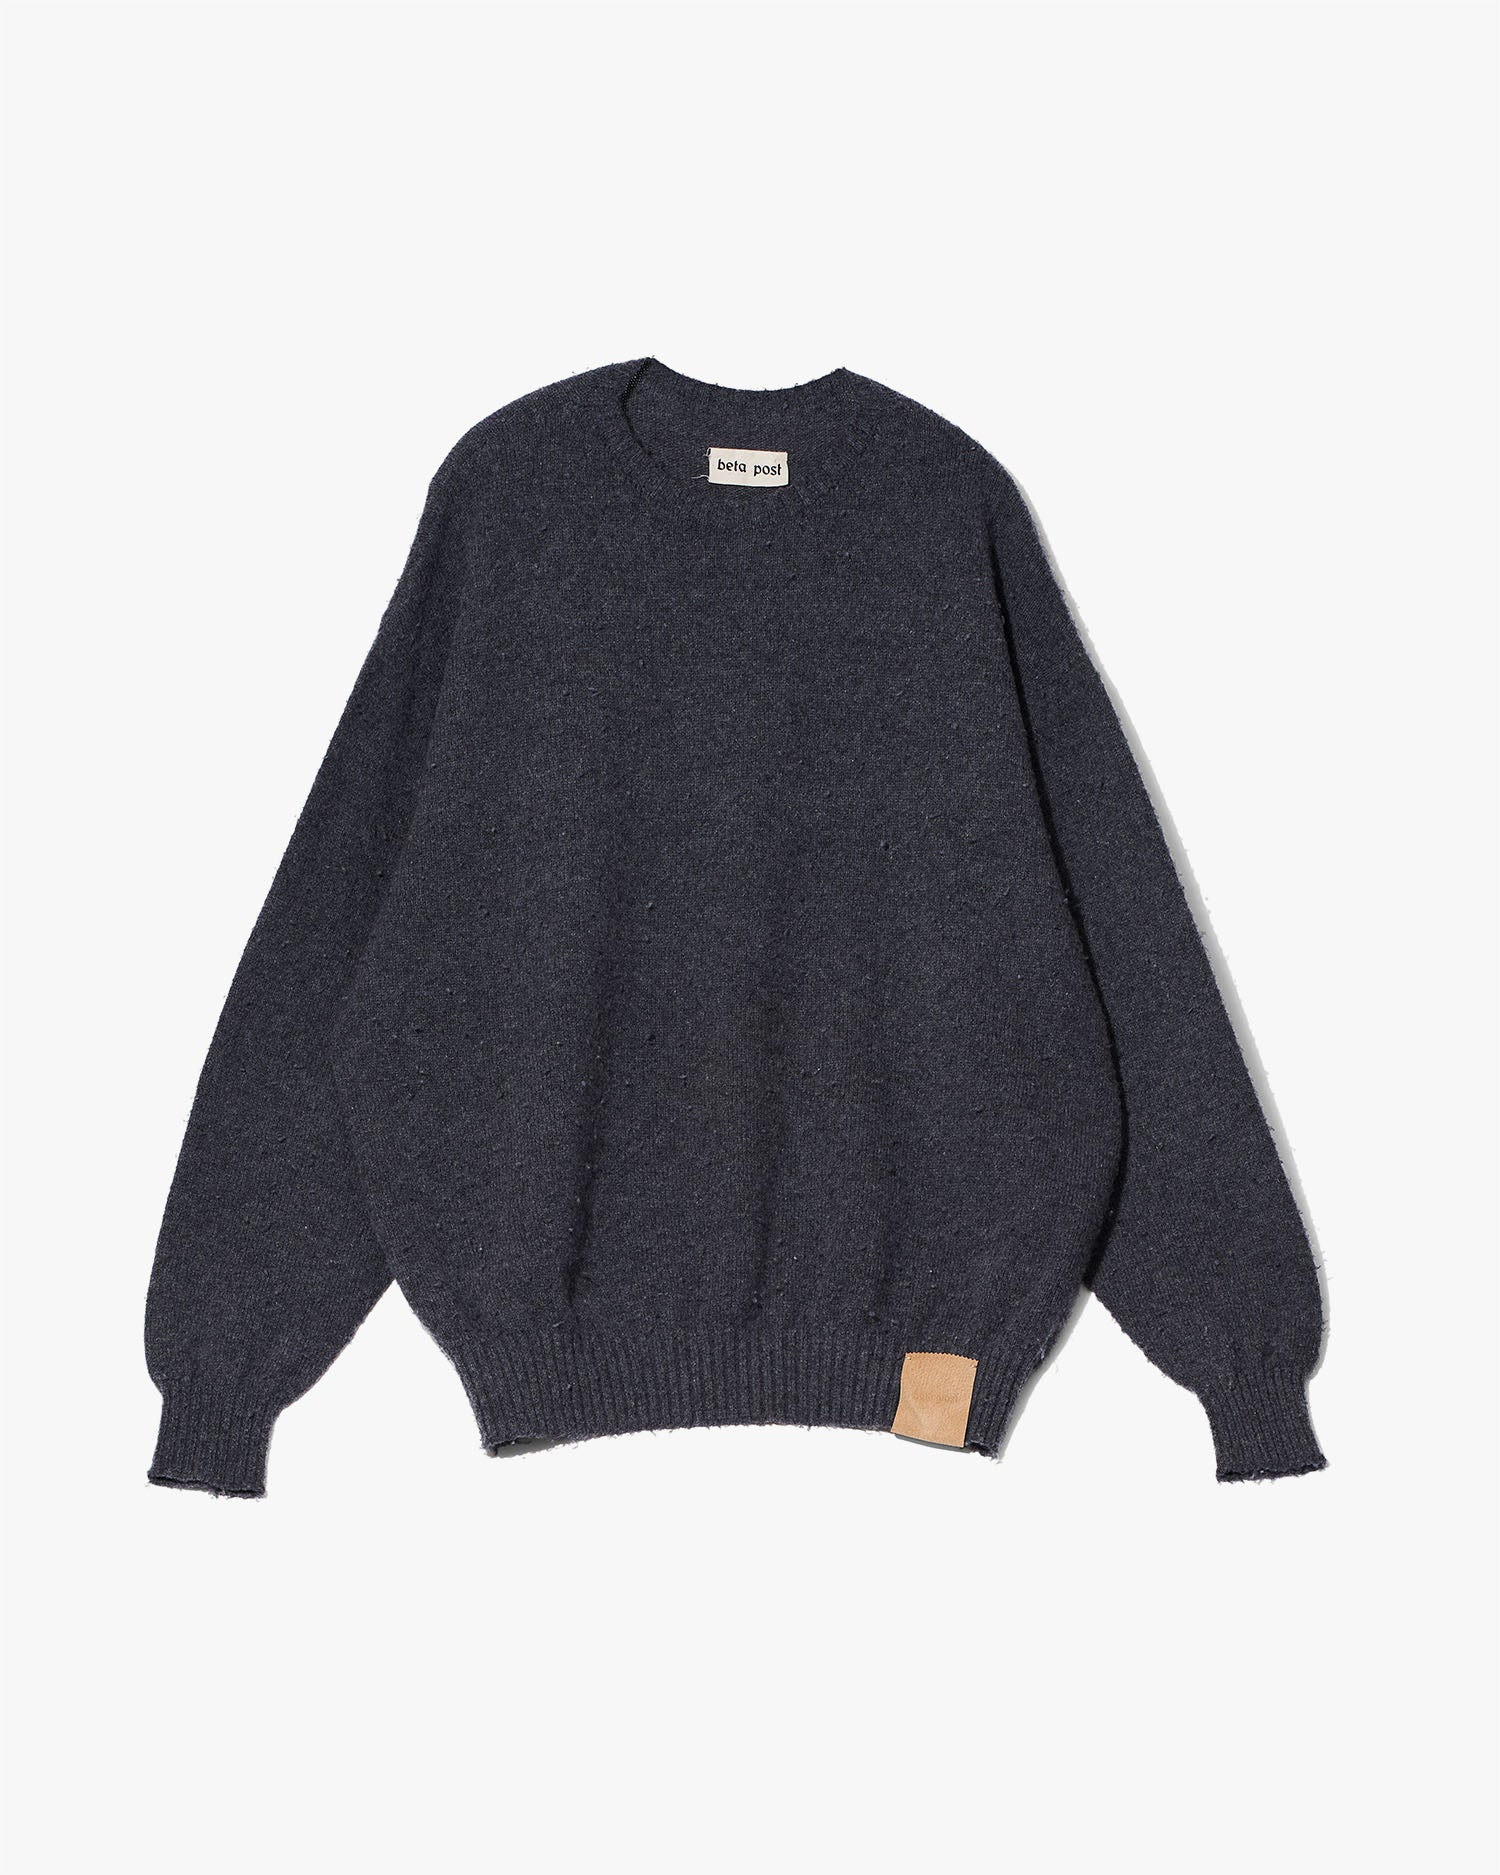 Pilled Aging Sweater